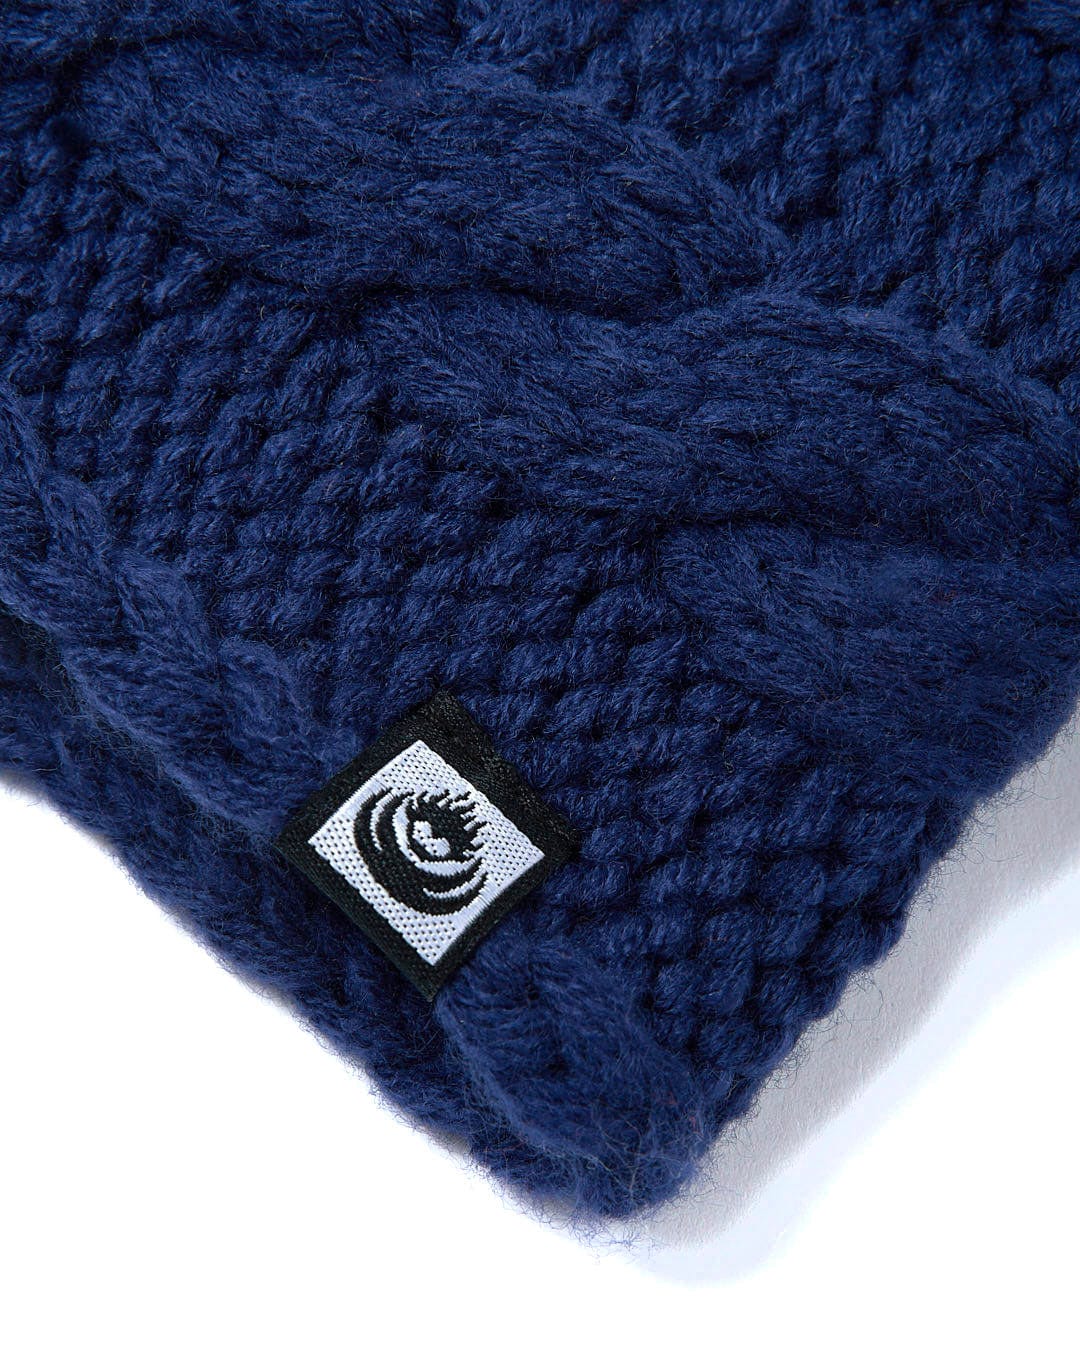 A fashionable Saltrock Cable - Knitted Headband - Blue with a logo on it, offering both warmth and style.